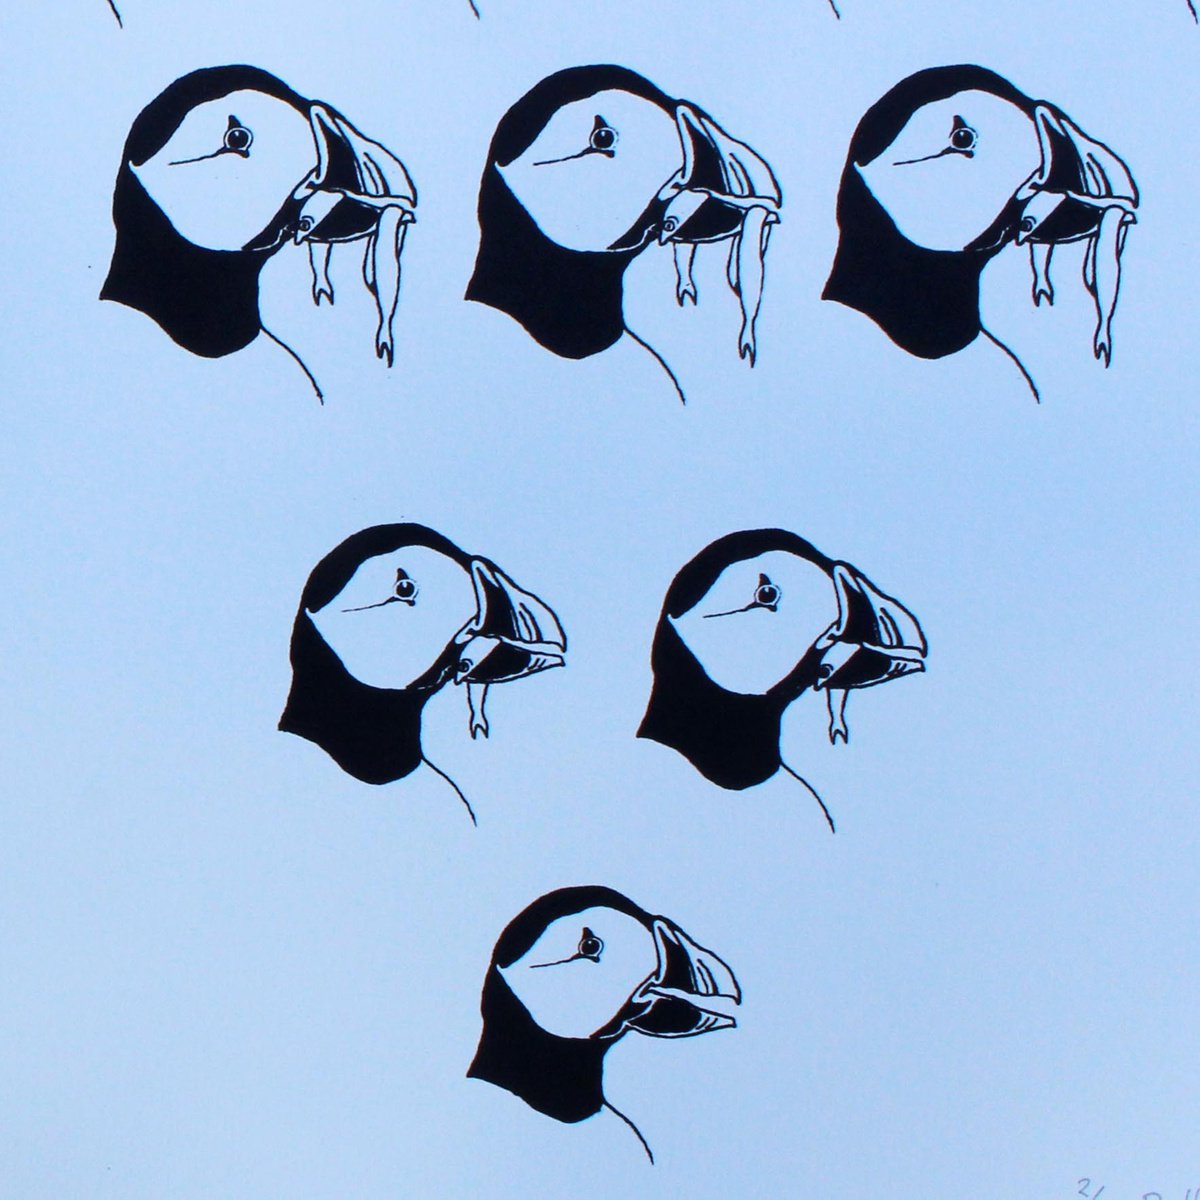 Puffins in Crisis by Carole King